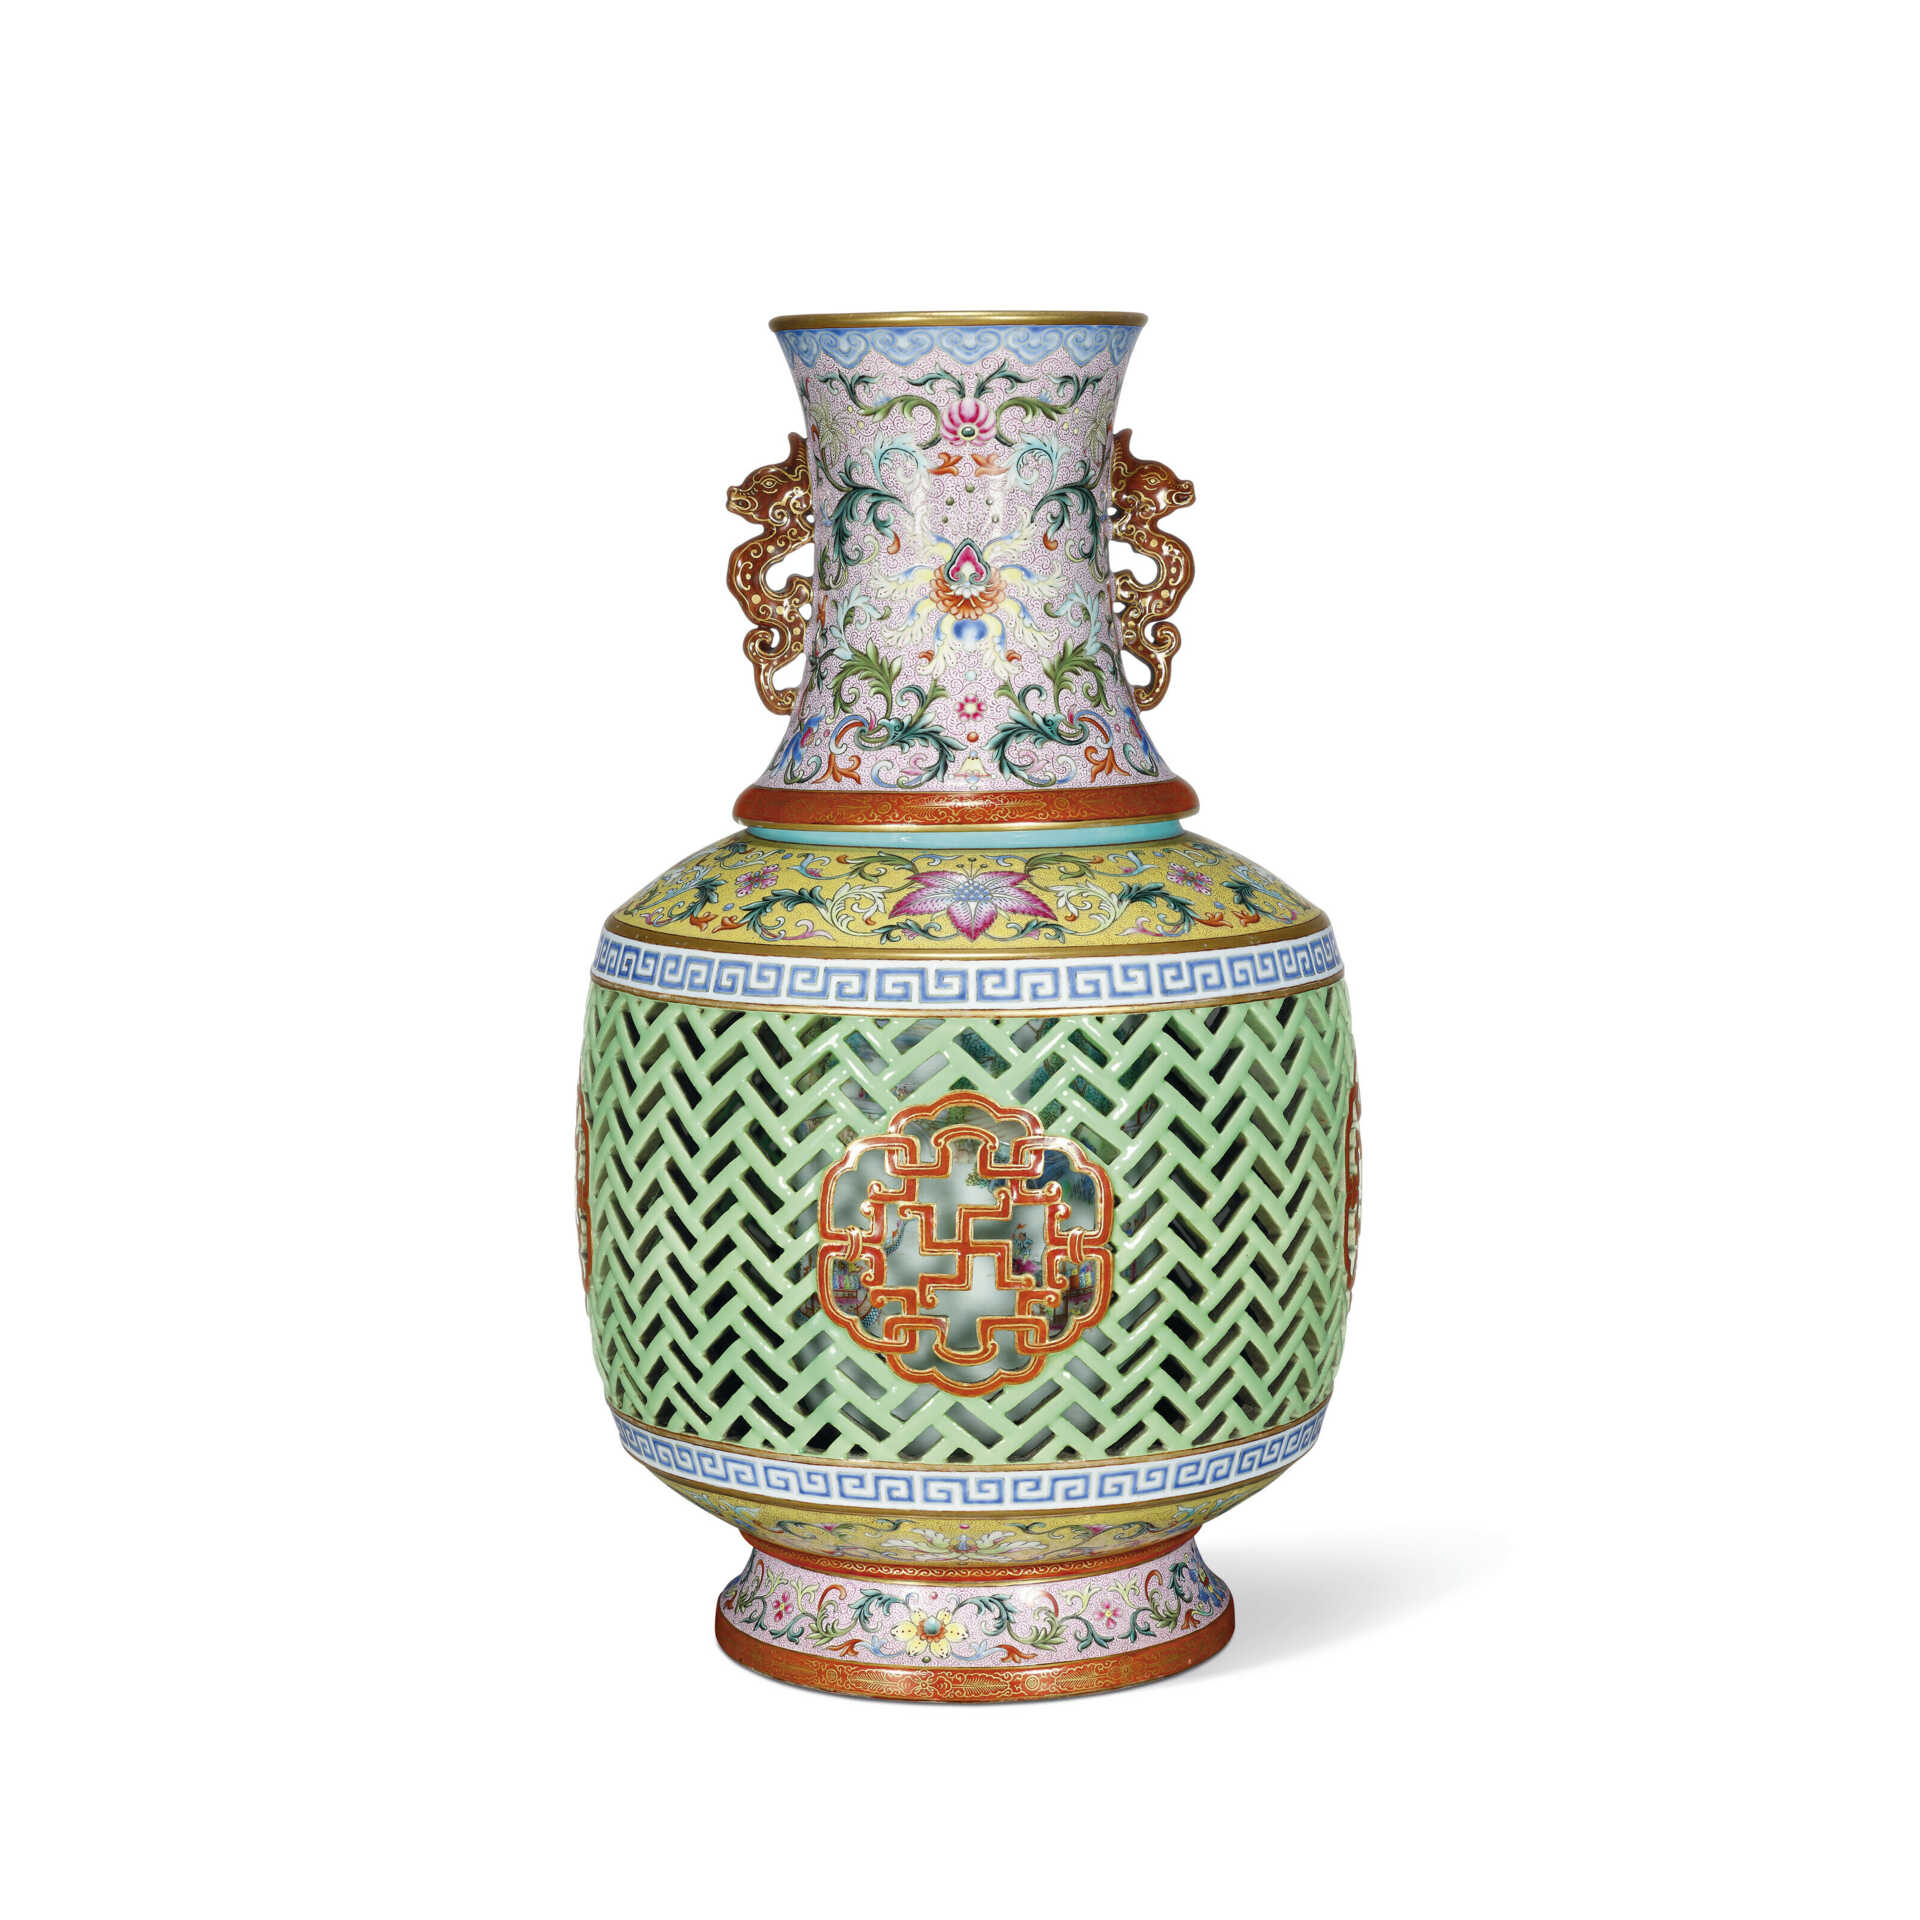 A MAGNIFICENT YANGCAI RETICULATED AND ROTATING ‘DRAGON BOAT’ VASE